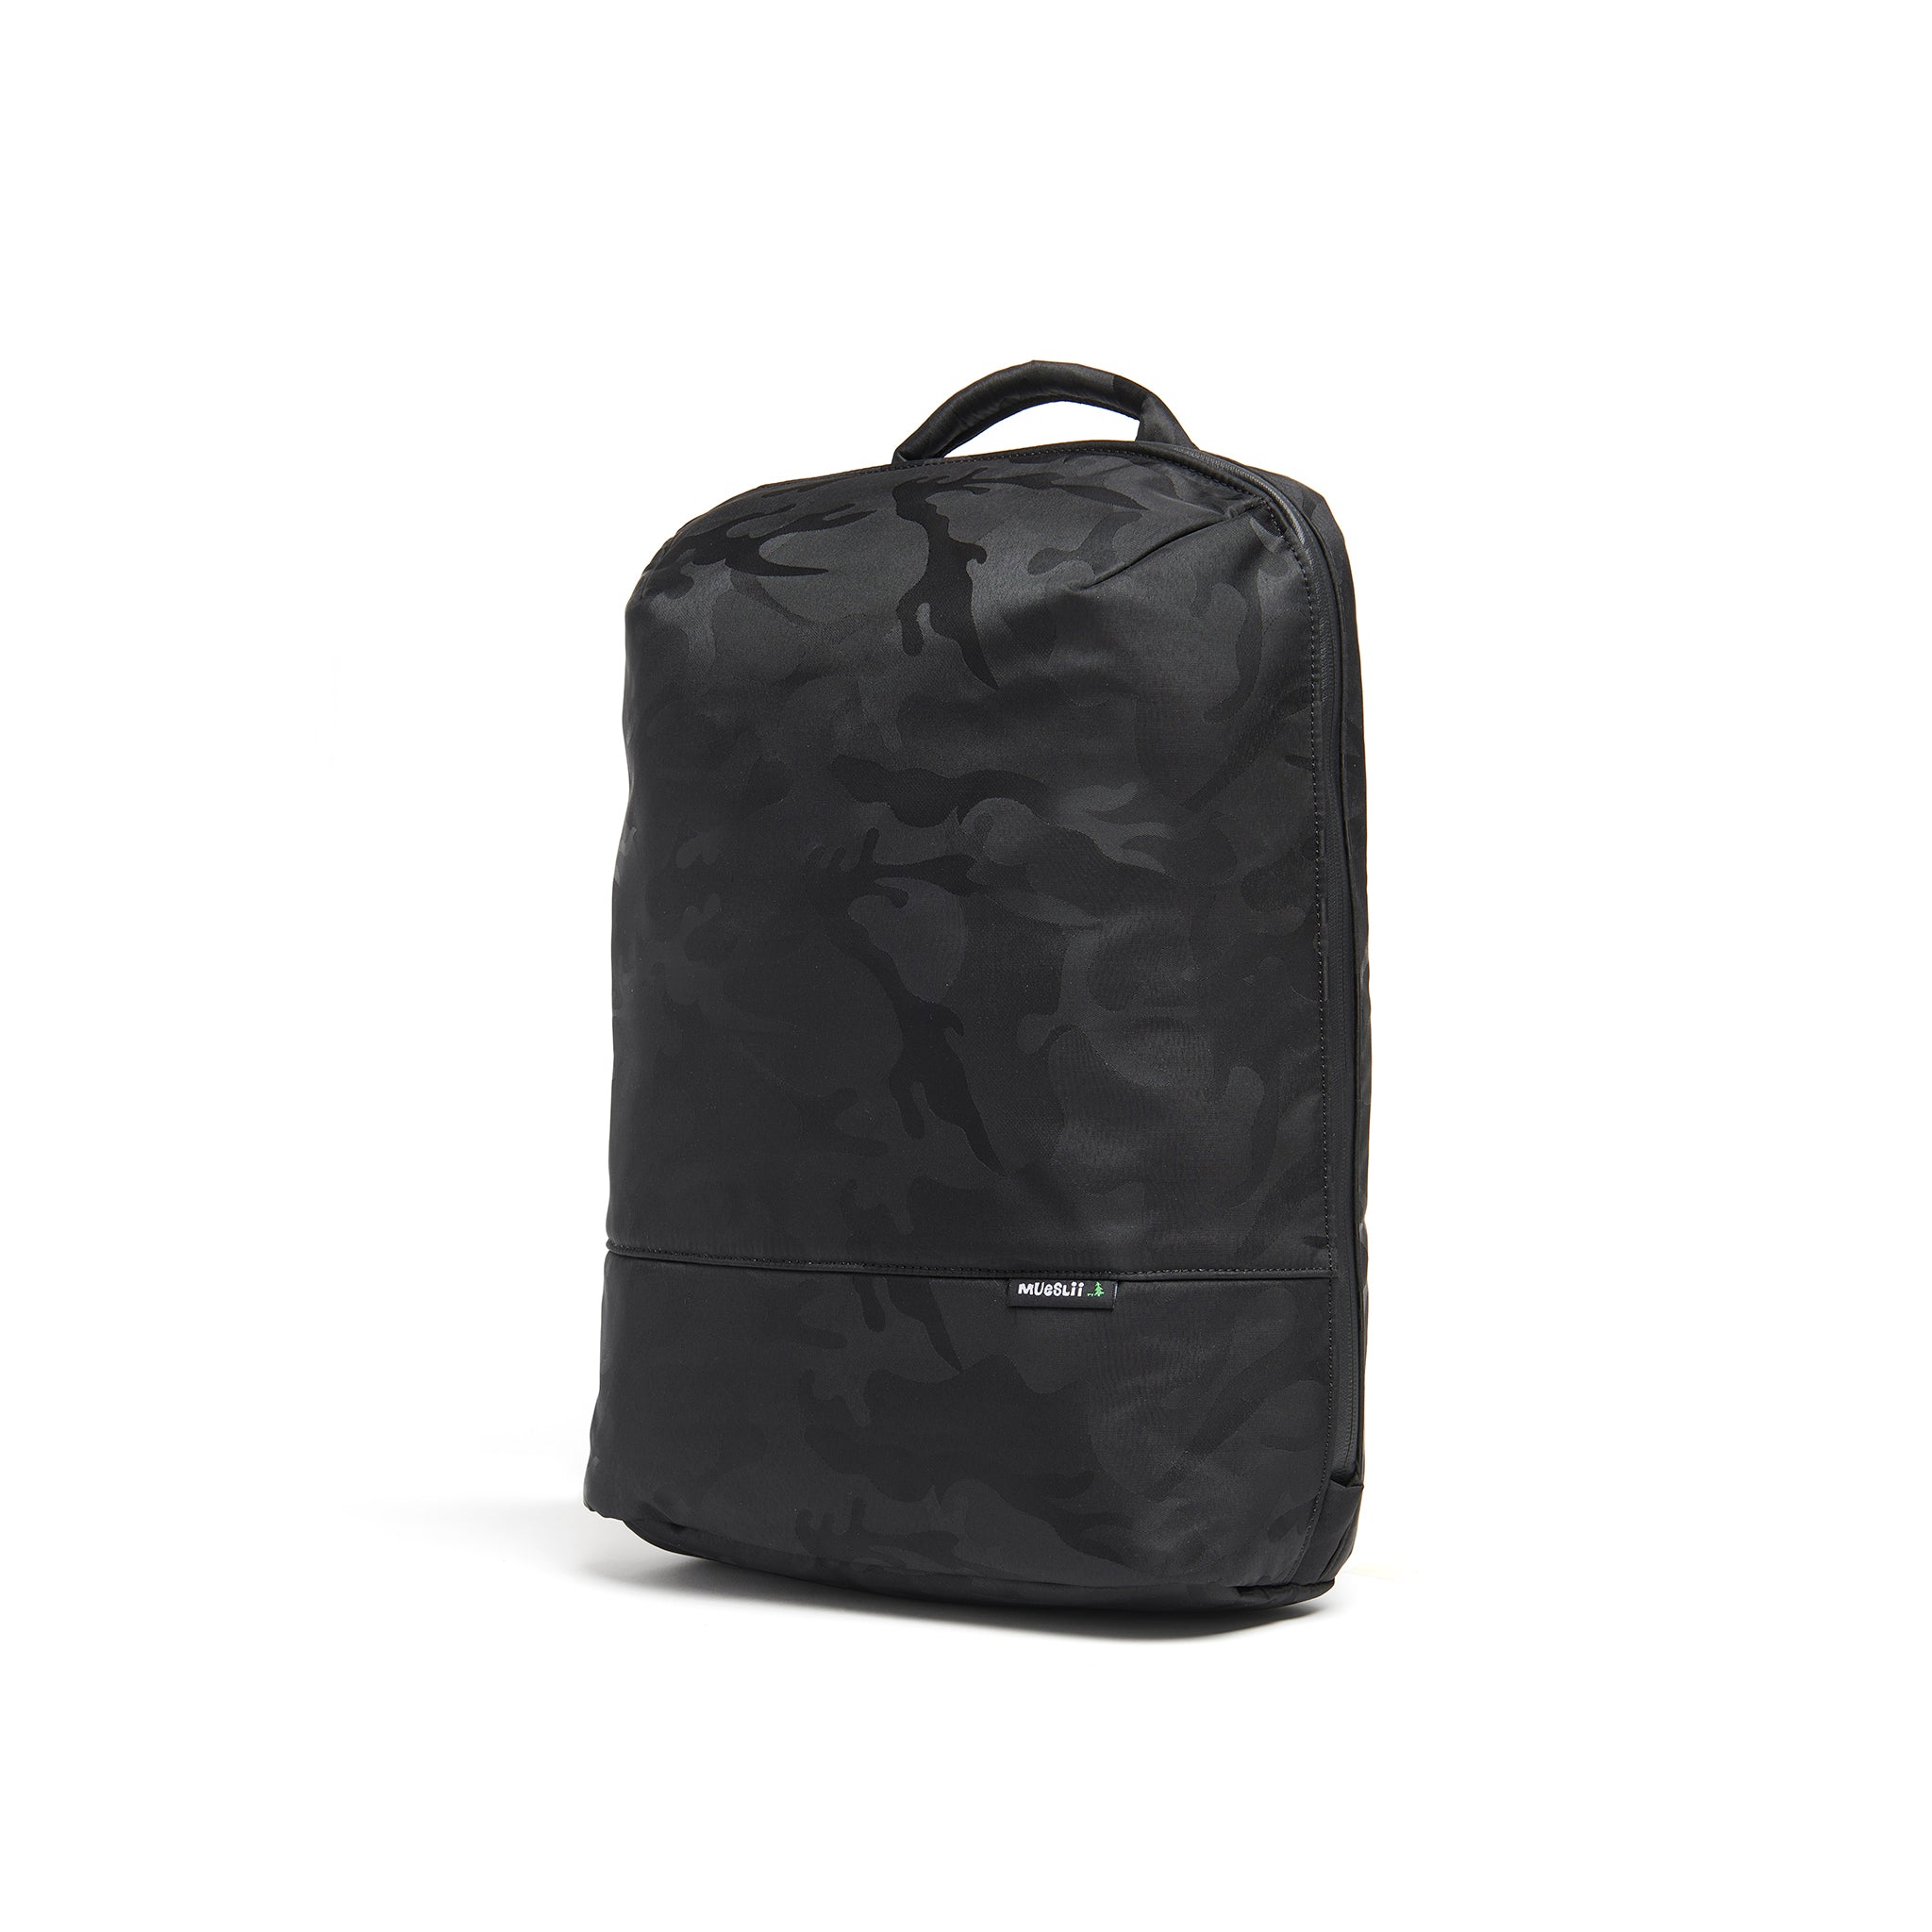 Mueslii daily backpack, made of jacquard  waterproof nylon, camouflage pattern, with a laptop compartment, color black, side view.